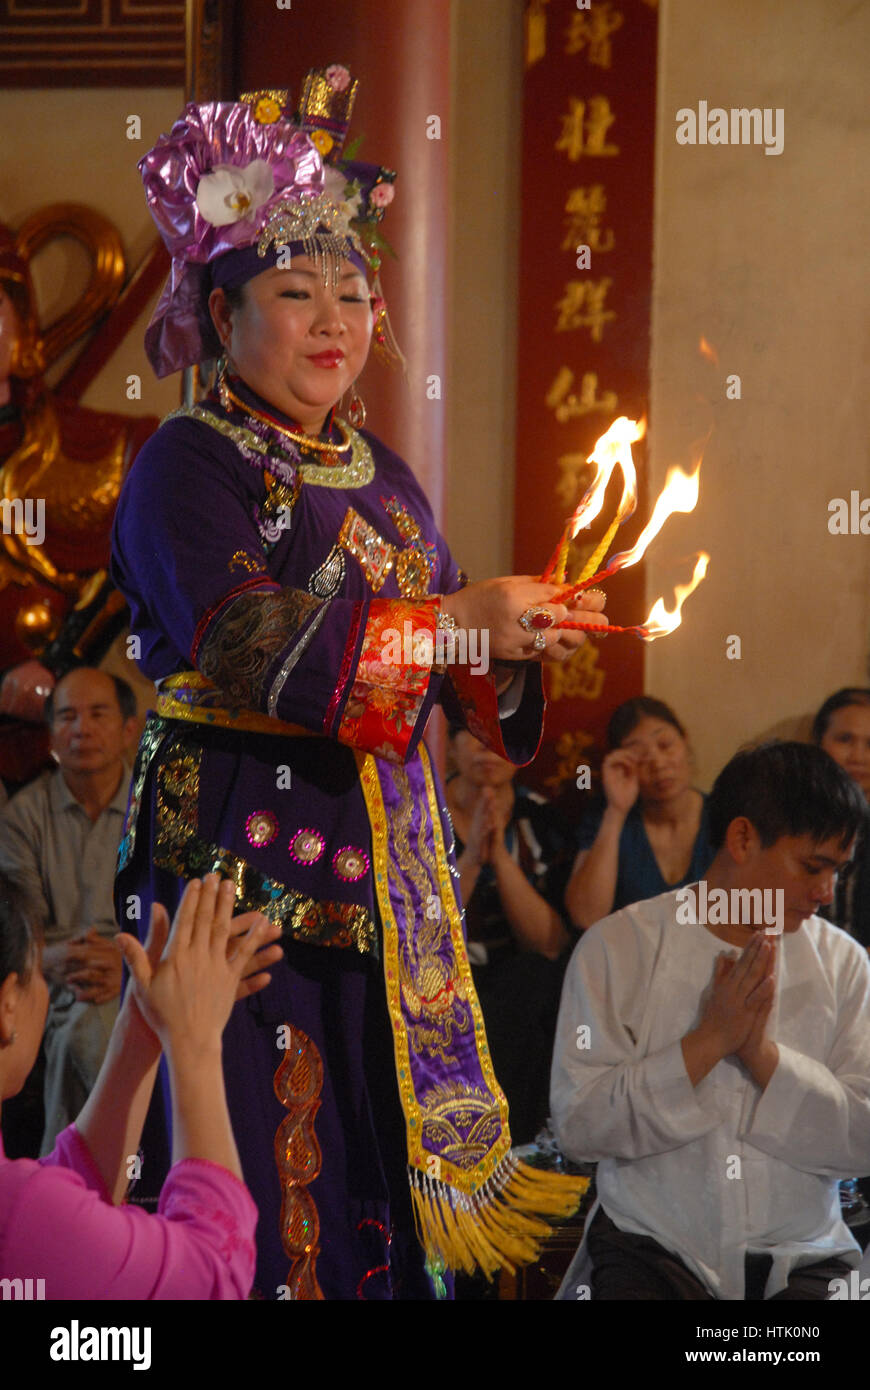 High Priestess handing out offerings in a temple, Hanoi, Vietnam. Stock Photo